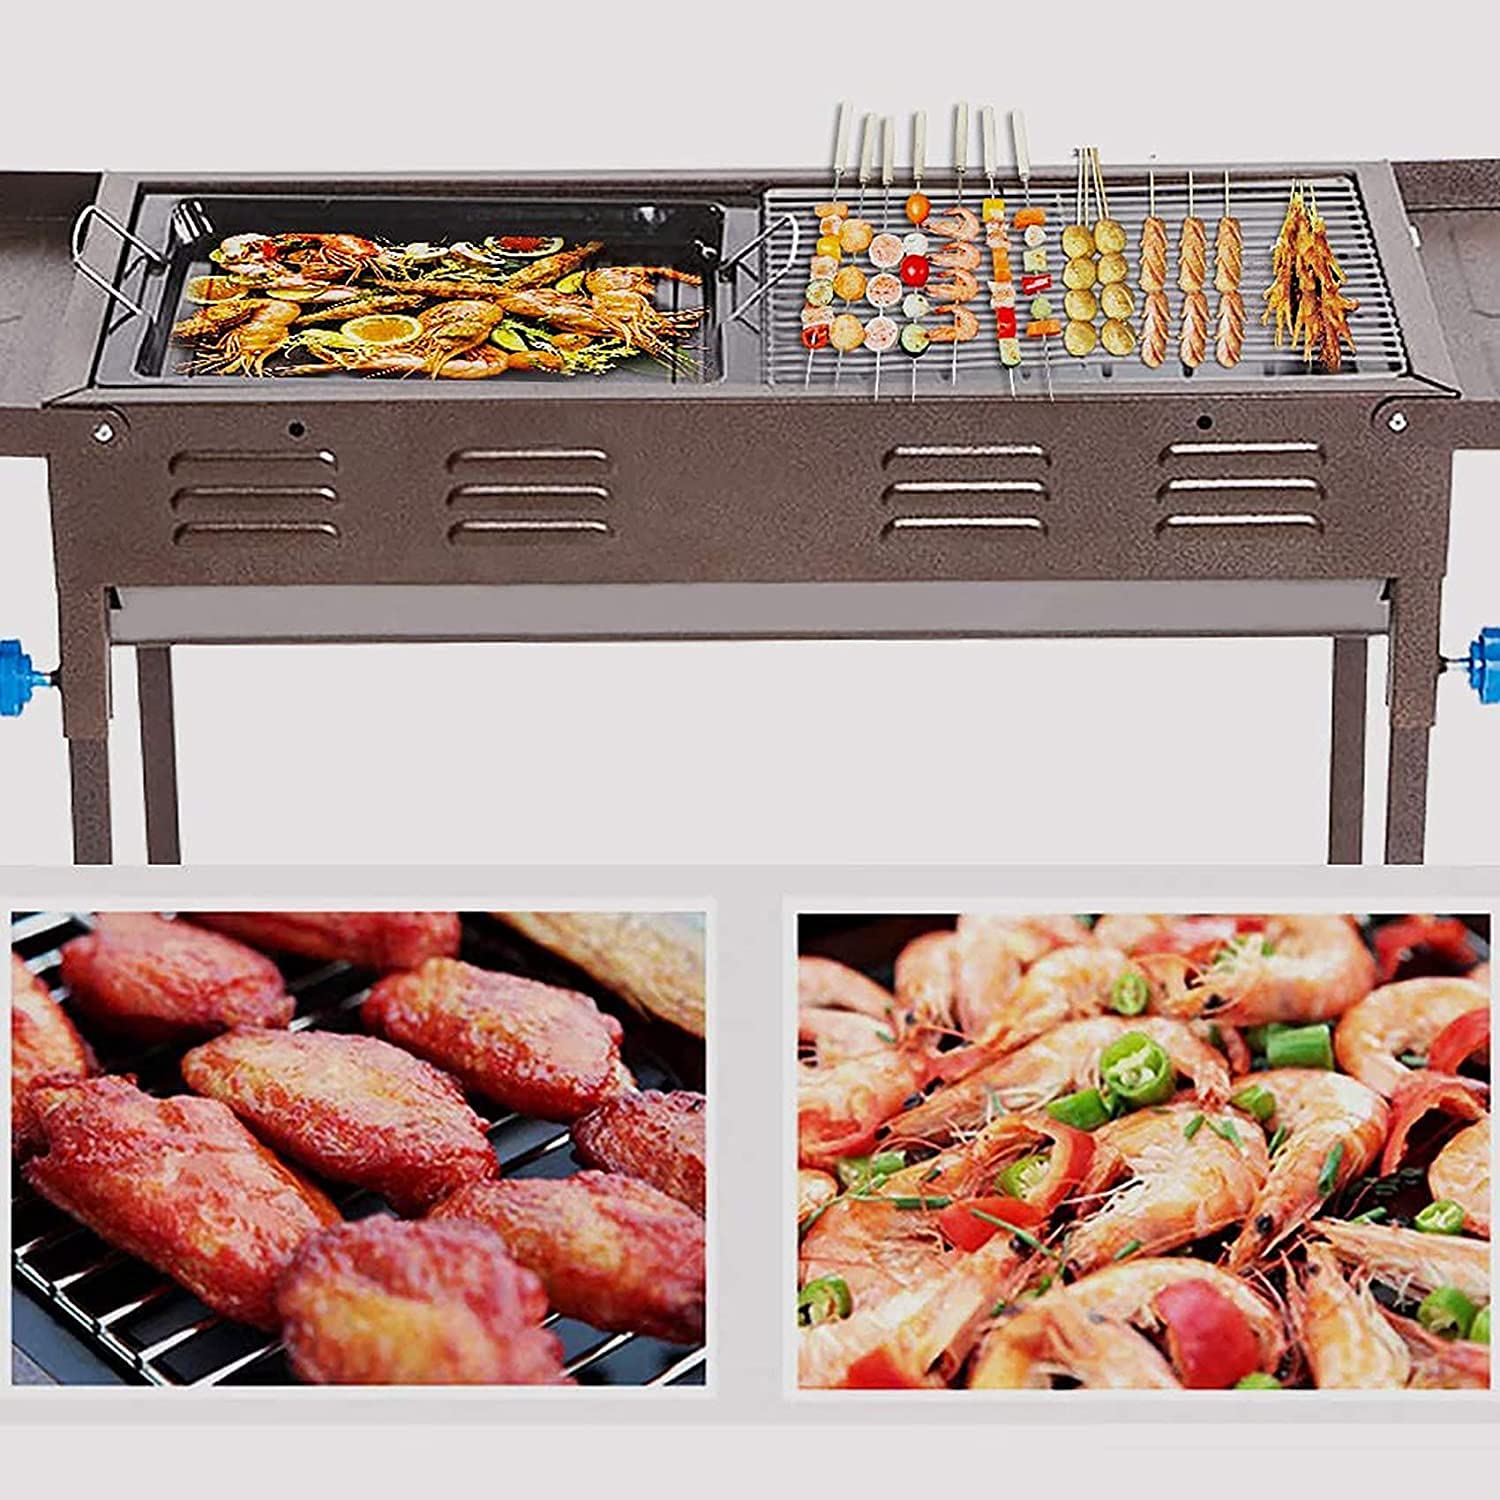 VIO Charcoal Grill Portable BBQ Grill Folding Barbecue Grill Charcoal Shish Kebab Grill Stainless Steel Camping Grill for Outdoor Picnic, Patio, Backyard & Camping, Suitable For 5-15 People